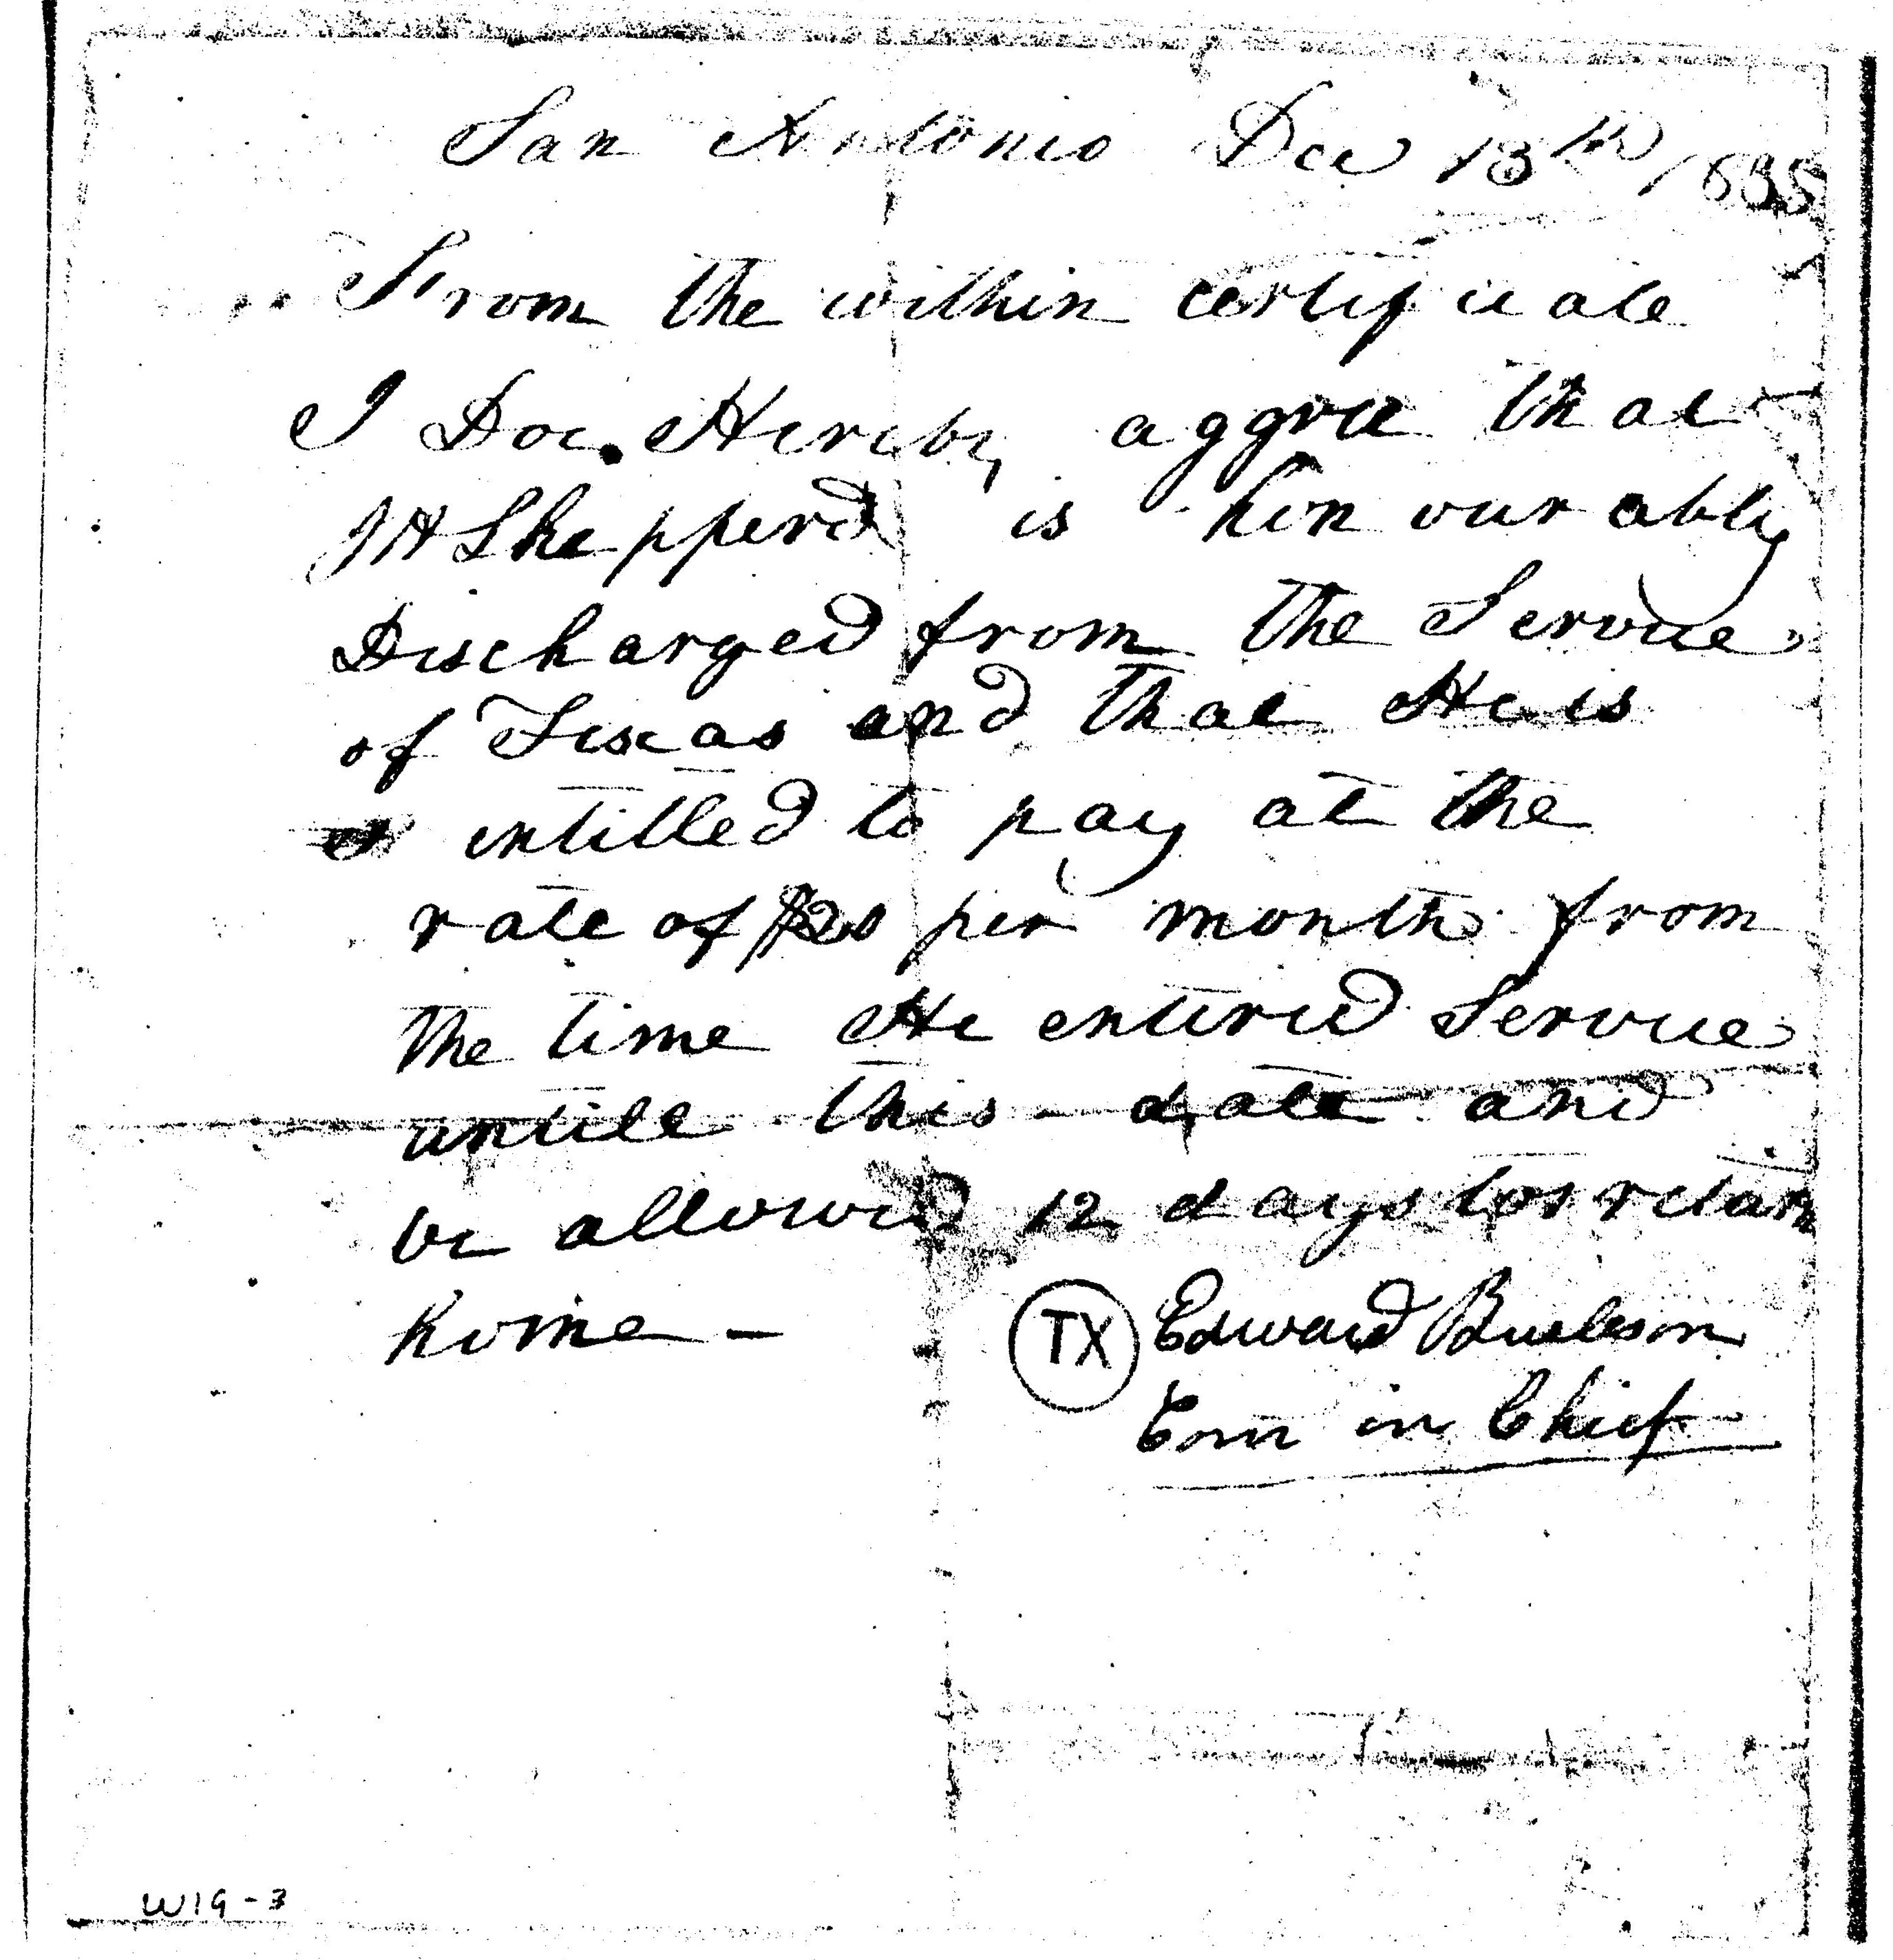 Jacob Shepperd's honorable discharge from the Texas army following the Siege of Bexar signed by General Burleson